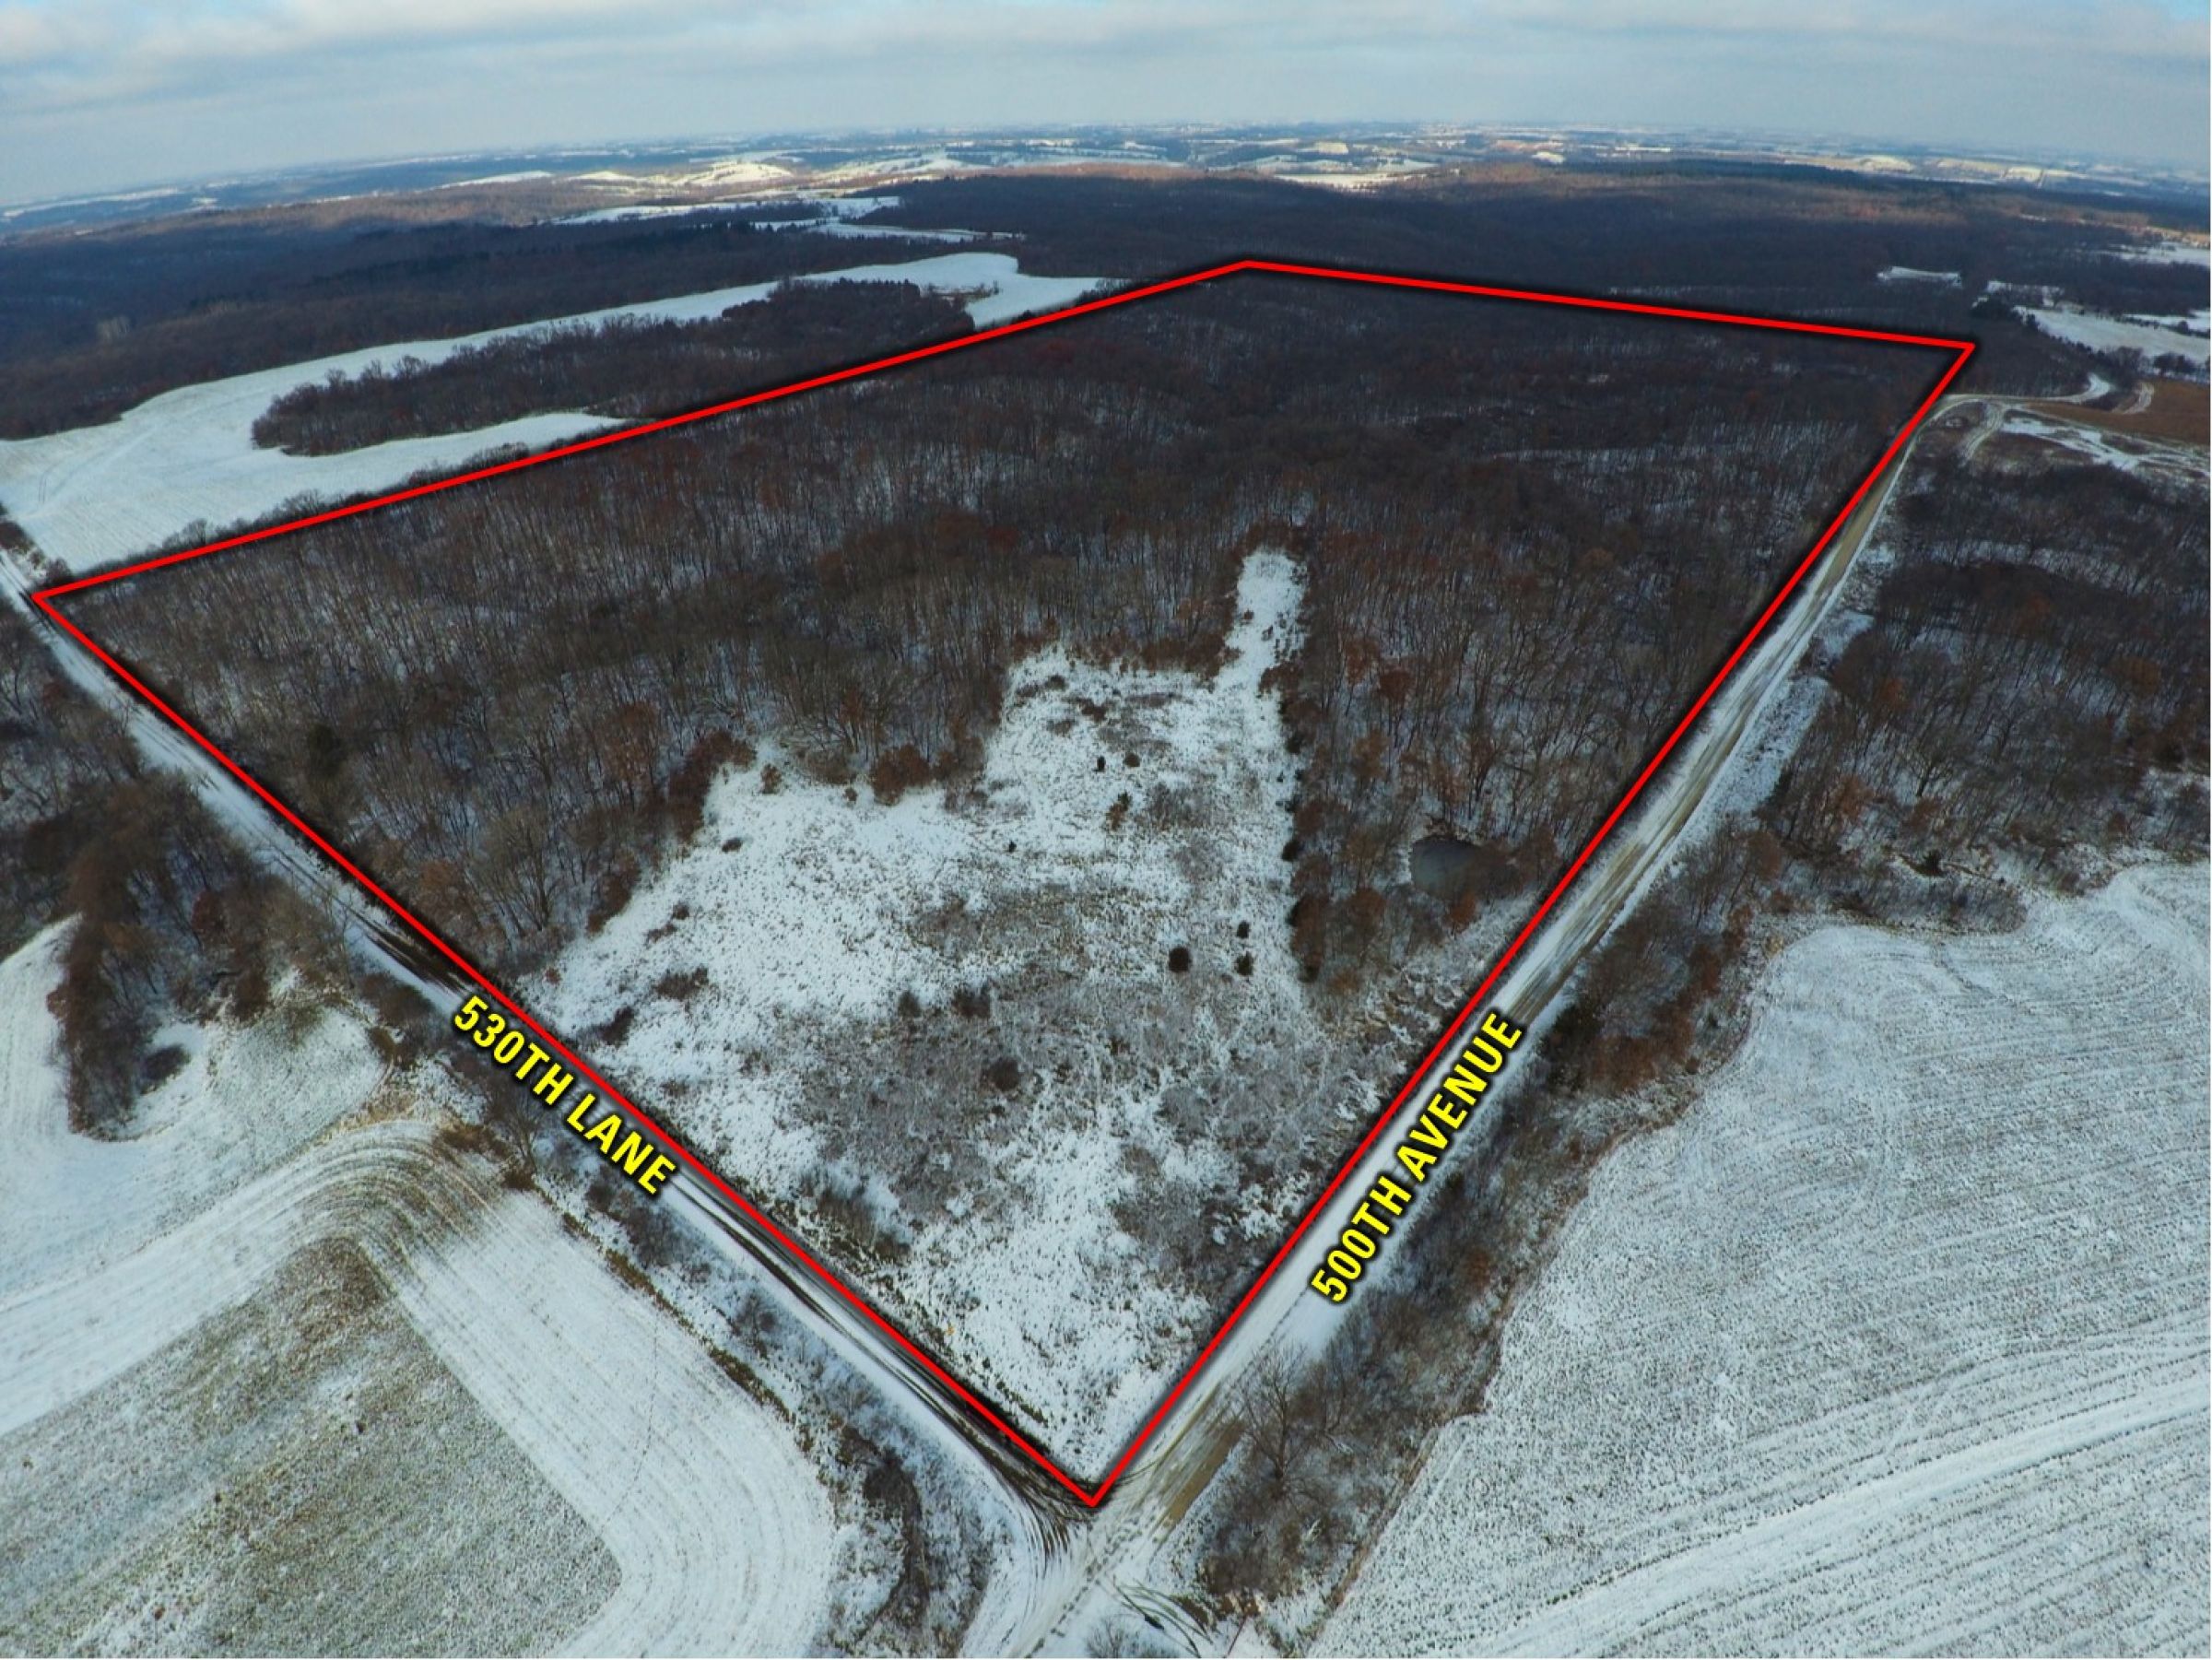 Peoples Company Land for Sale in Lucas County, IA - 540th Ln Russell, IA 50238